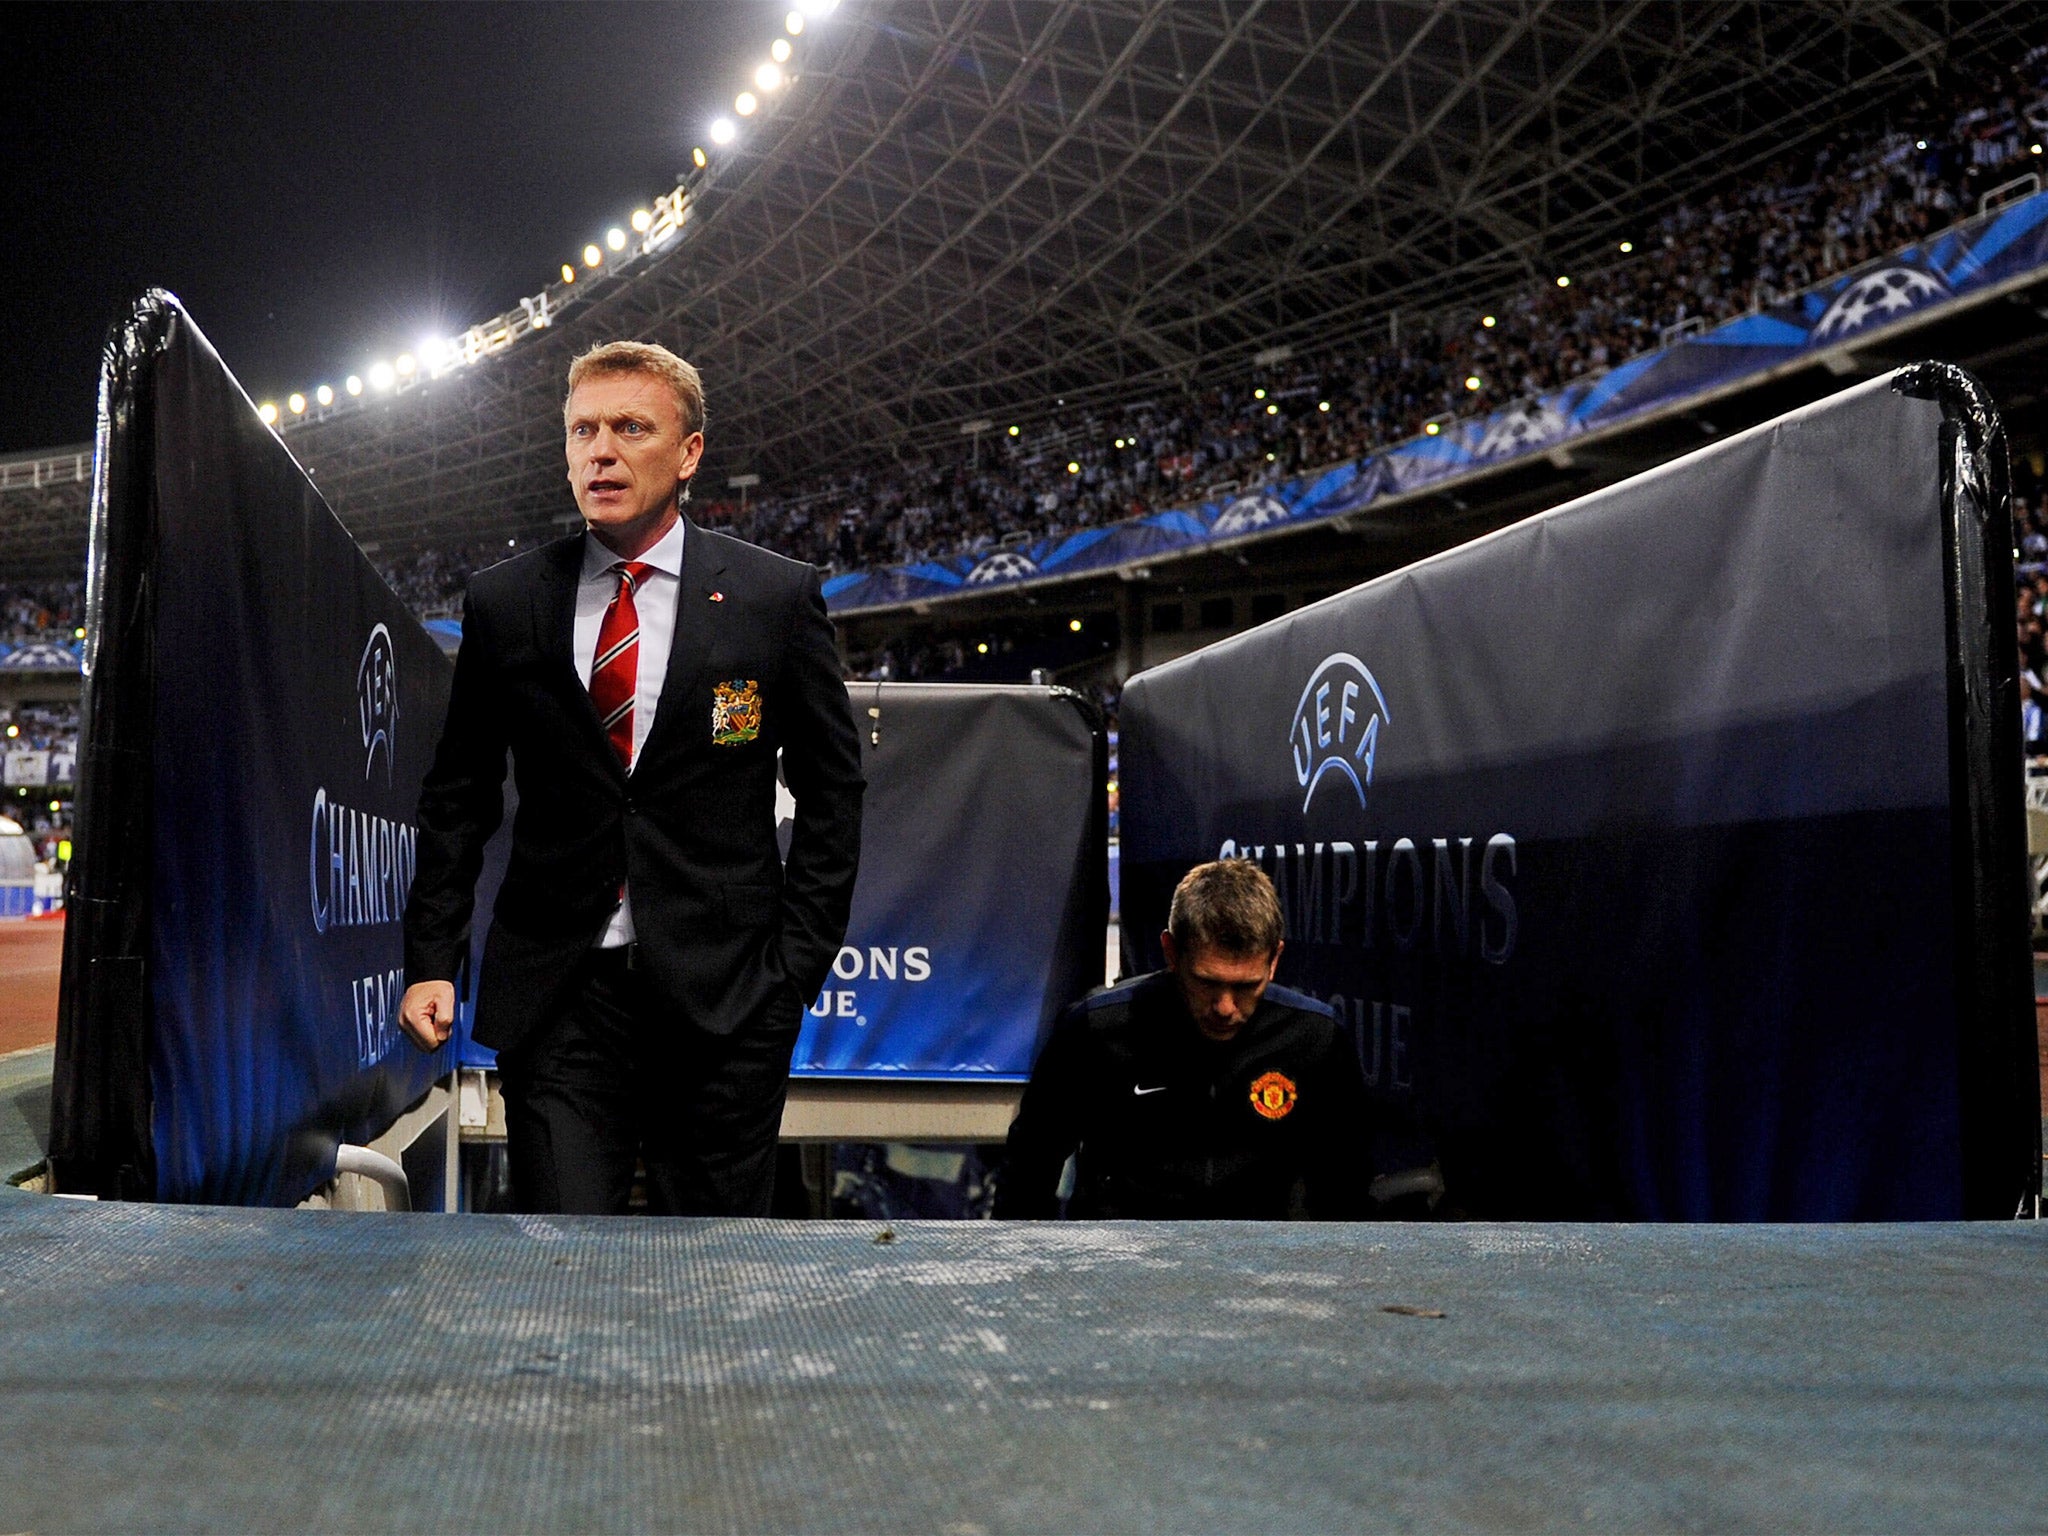 The then Manchester United manager David Moyes walks out of the tunnel for a Champions League tie at Real Sociedad last year